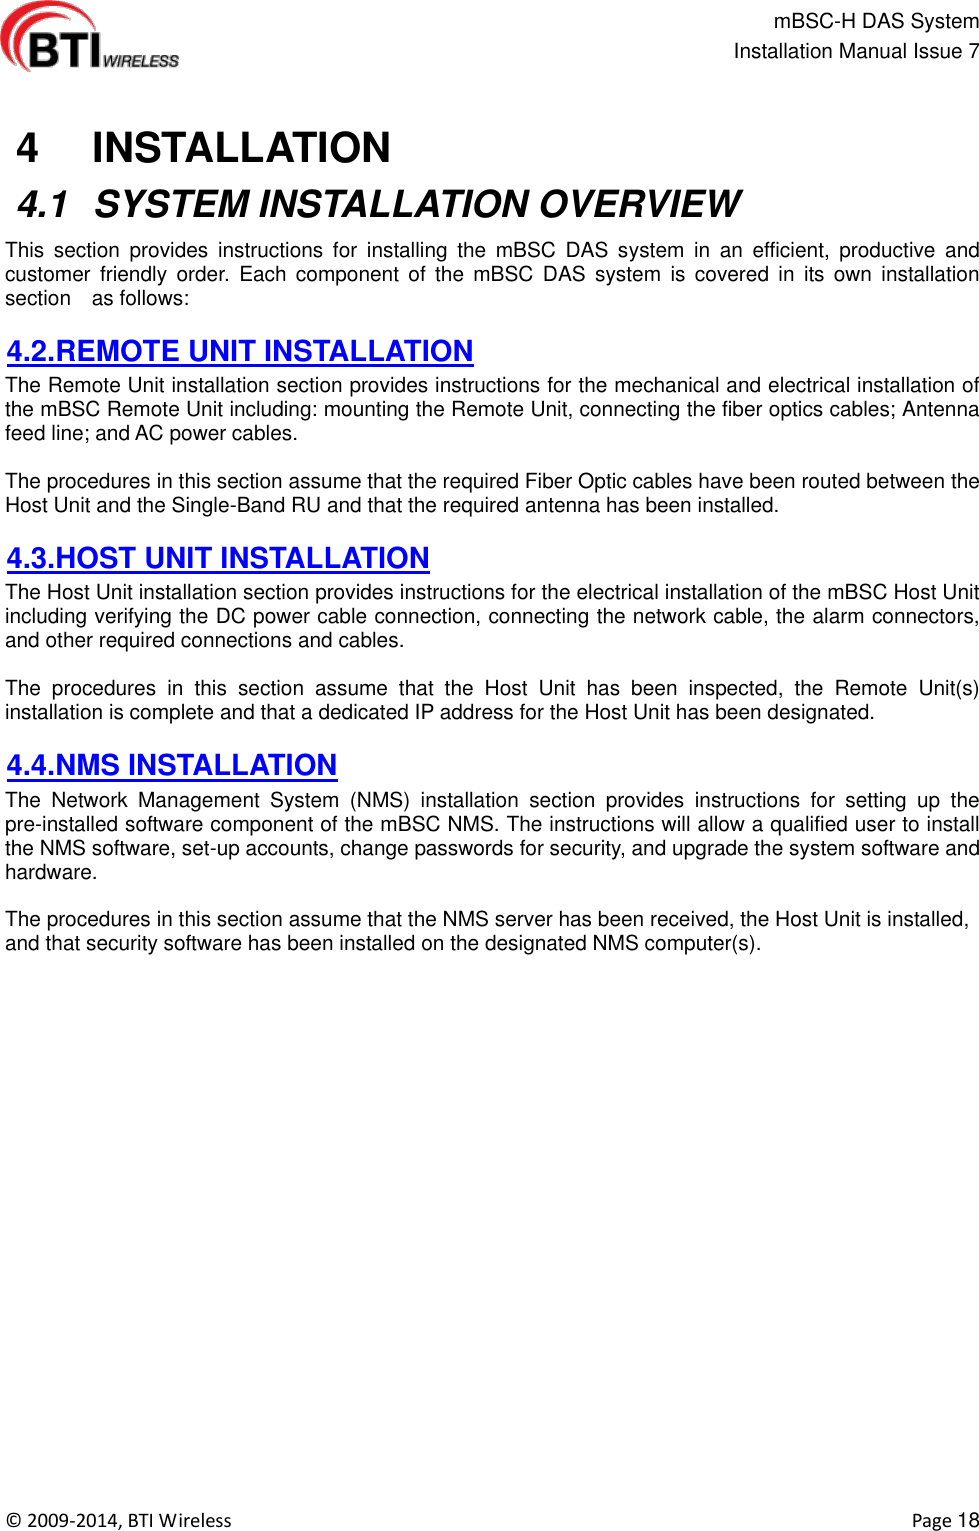                                                   mBSC-H DAS System   Installation Manual Issue 7  ©  2009-2014, BTI Wireless    Page 18    4   INSTALLATION  4.1  SYSTEM INSTALLATION OVERVIEW This  section  provides  instructions  for  installing  the  mBSC  DAS  system  in  an  efficient,  productive  and customer  friendly  order.  Each  component  of  the  mBSC  DAS  system  is  covered  in  its  own  installation section    as follows:    4.2.REMOTE UNIT INSTALLATION The Remote Unit installation section provides instructions for the mechanical and electrical installation of the mBSC Remote Unit including: mounting the Remote Unit, connecting the fiber optics cables; Antenna feed line; and AC power cables.  The procedures in this section assume that the required Fiber Optic cables have been routed between the Host Unit and the Single-Band RU and that the required antenna has been installed.  4.3.HOST UNIT INSTALLATION The Host Unit installation section provides instructions for the electrical installation of the mBSC Host Unit including verifying the DC power cable connection, connecting the network cable, the alarm connectors, and other required connections and cables.  The  procedures  in  this  section  assume  that  the  Host  Unit  has  been  inspected,  the  Remote  Unit(s) installation is complete and that a dedicated IP address for the Host Unit has been designated.  4.4.NMS INSTALLATION The  Network  Management  System  (NMS)  installation  section  provides  instructions  for  setting  up  the pre-installed software component of the mBSC NMS. The instructions will allow a qualified user to install the NMS software, set-up accounts, change passwords for security, and upgrade the system software and hardware.  The procedures in this section assume that the NMS server has been received, the Host Unit is installed, and that security software has been installed on the designated NMS computer(s).  